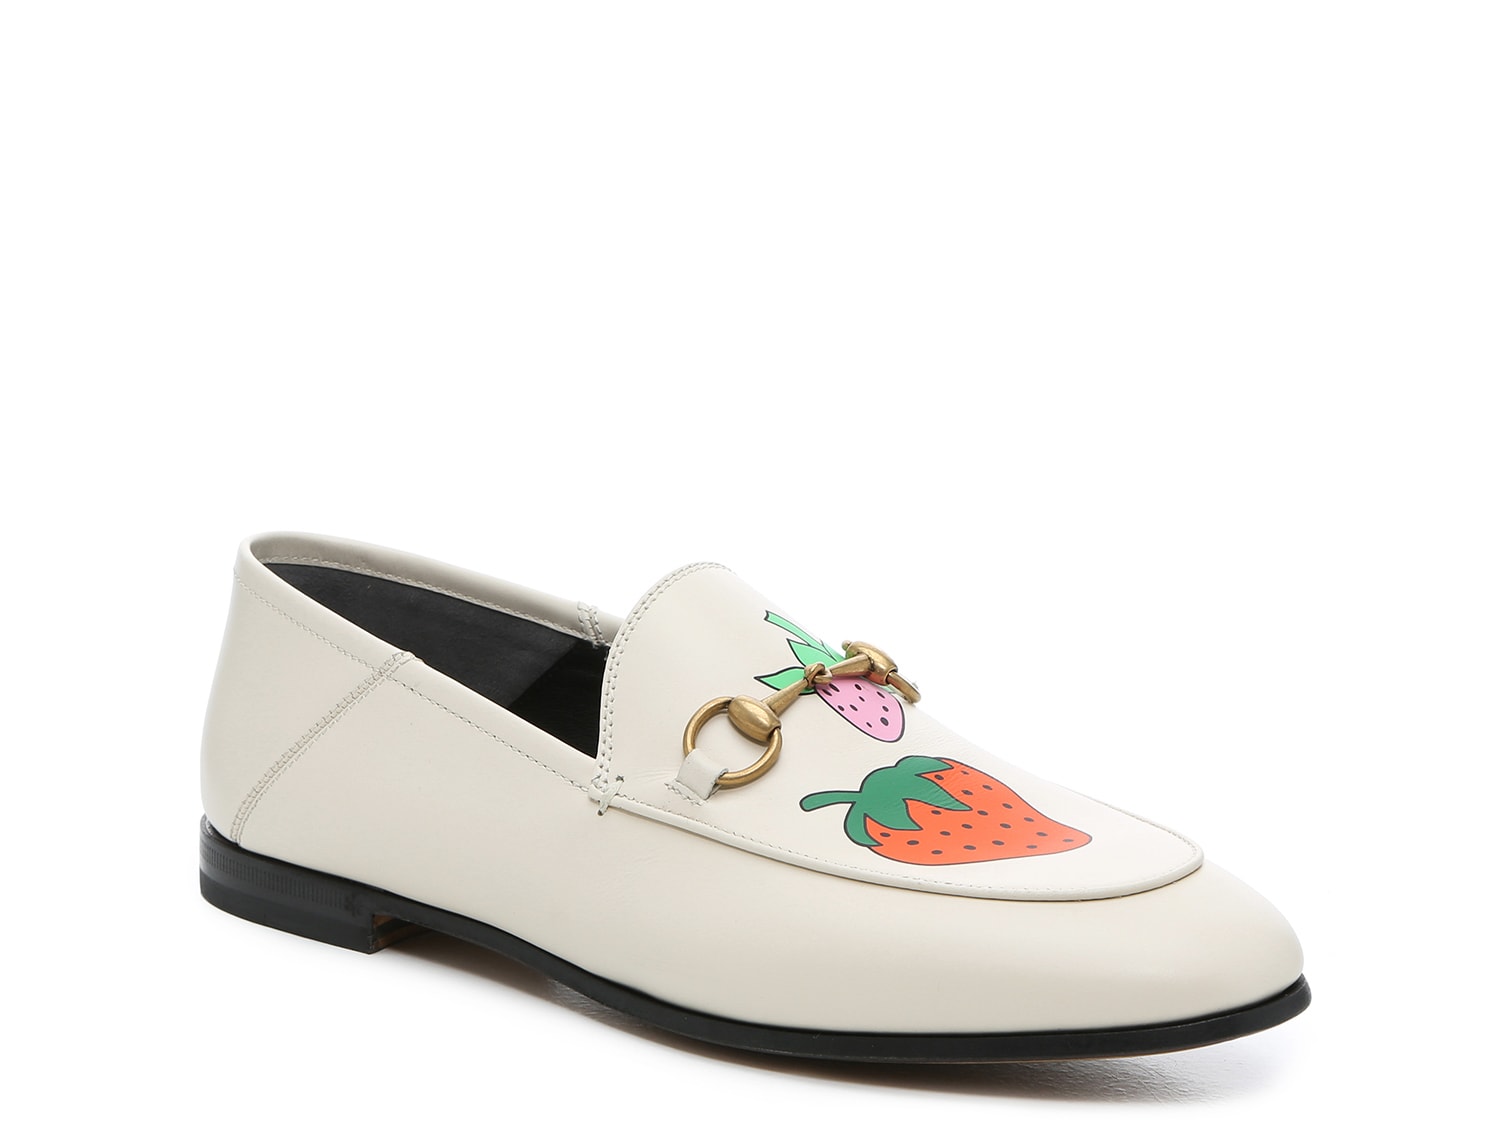 Gucci Brixton Loafer - Women's | DSW